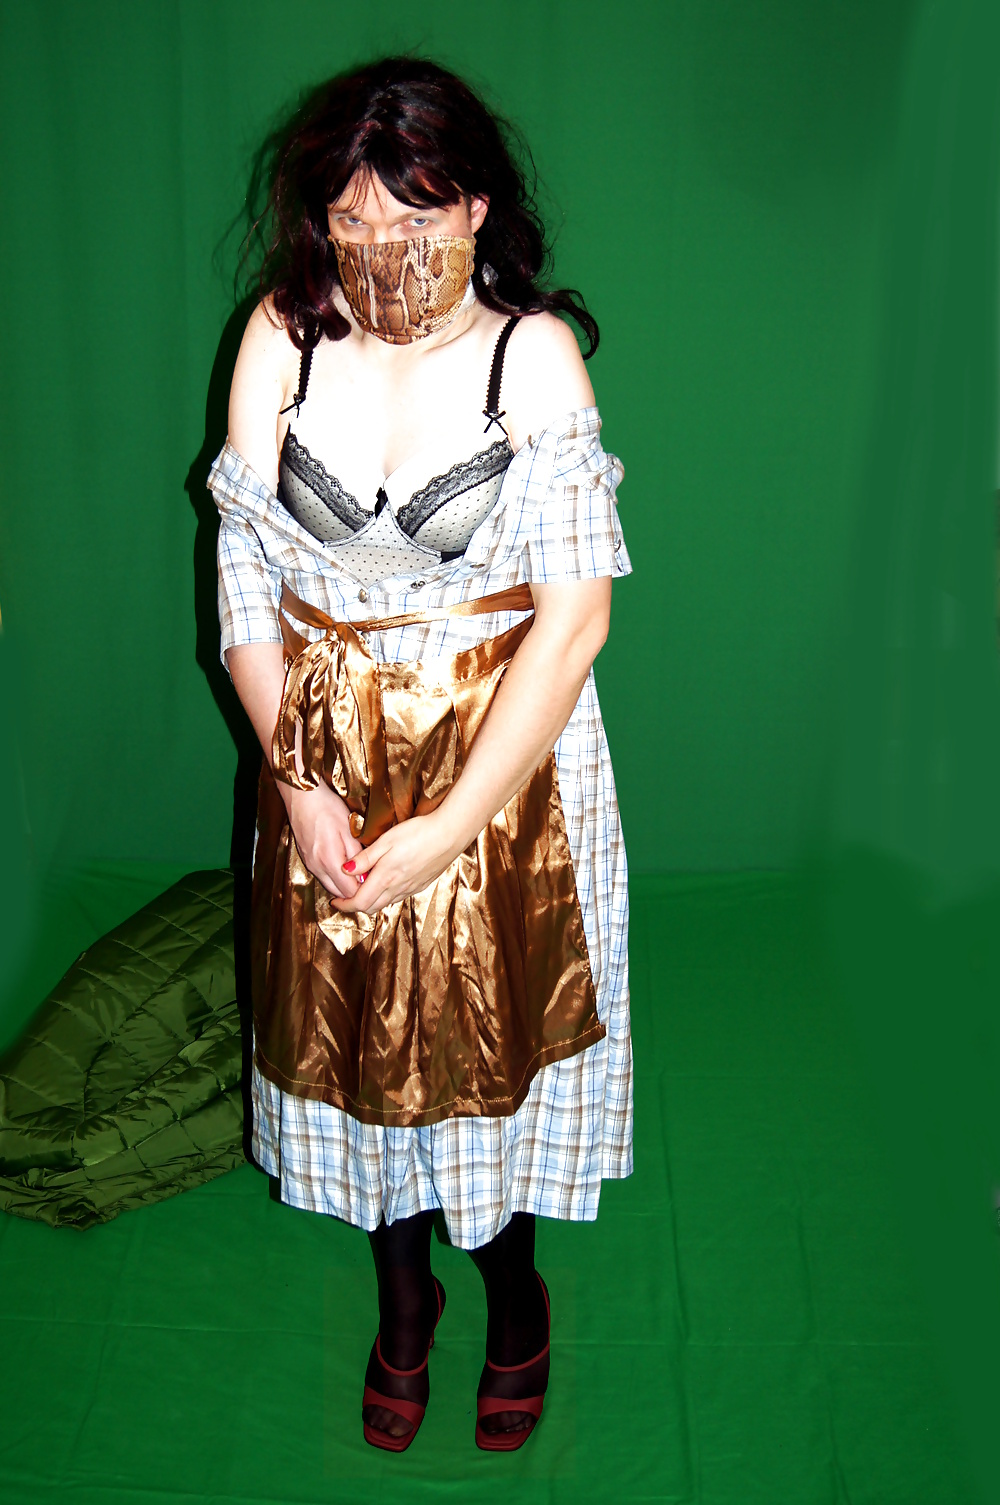 Tgirl with Dirndl under the green Jacket #27516935